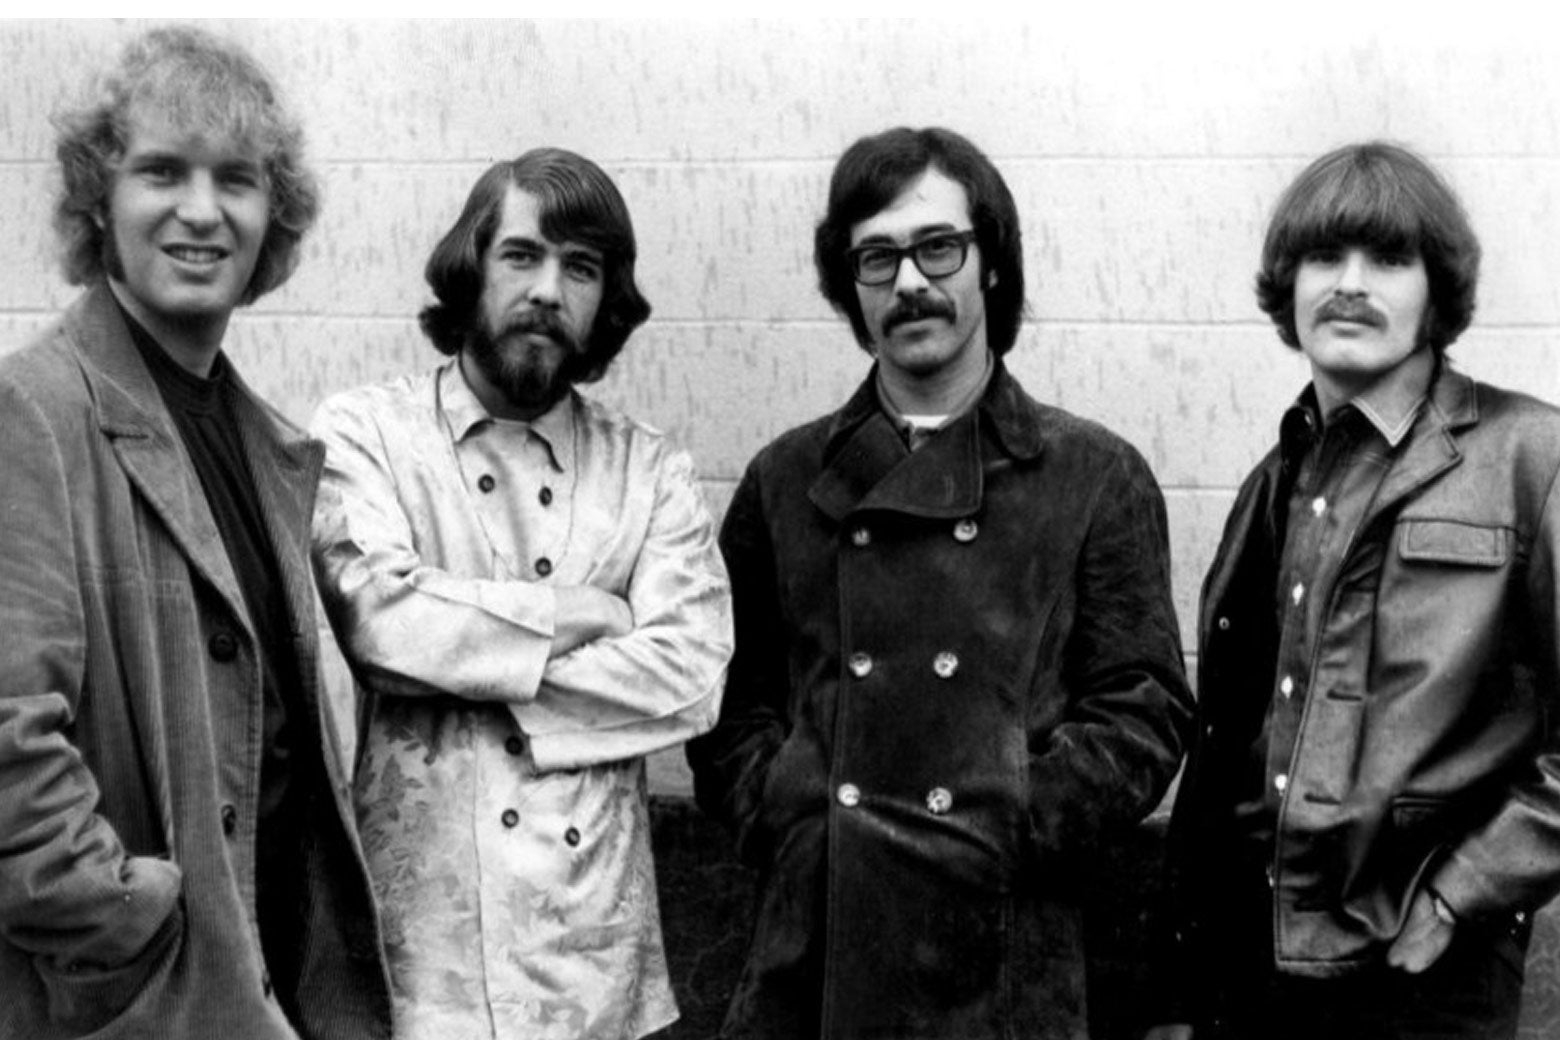 Black-and-white photo of the four band members in 1968.